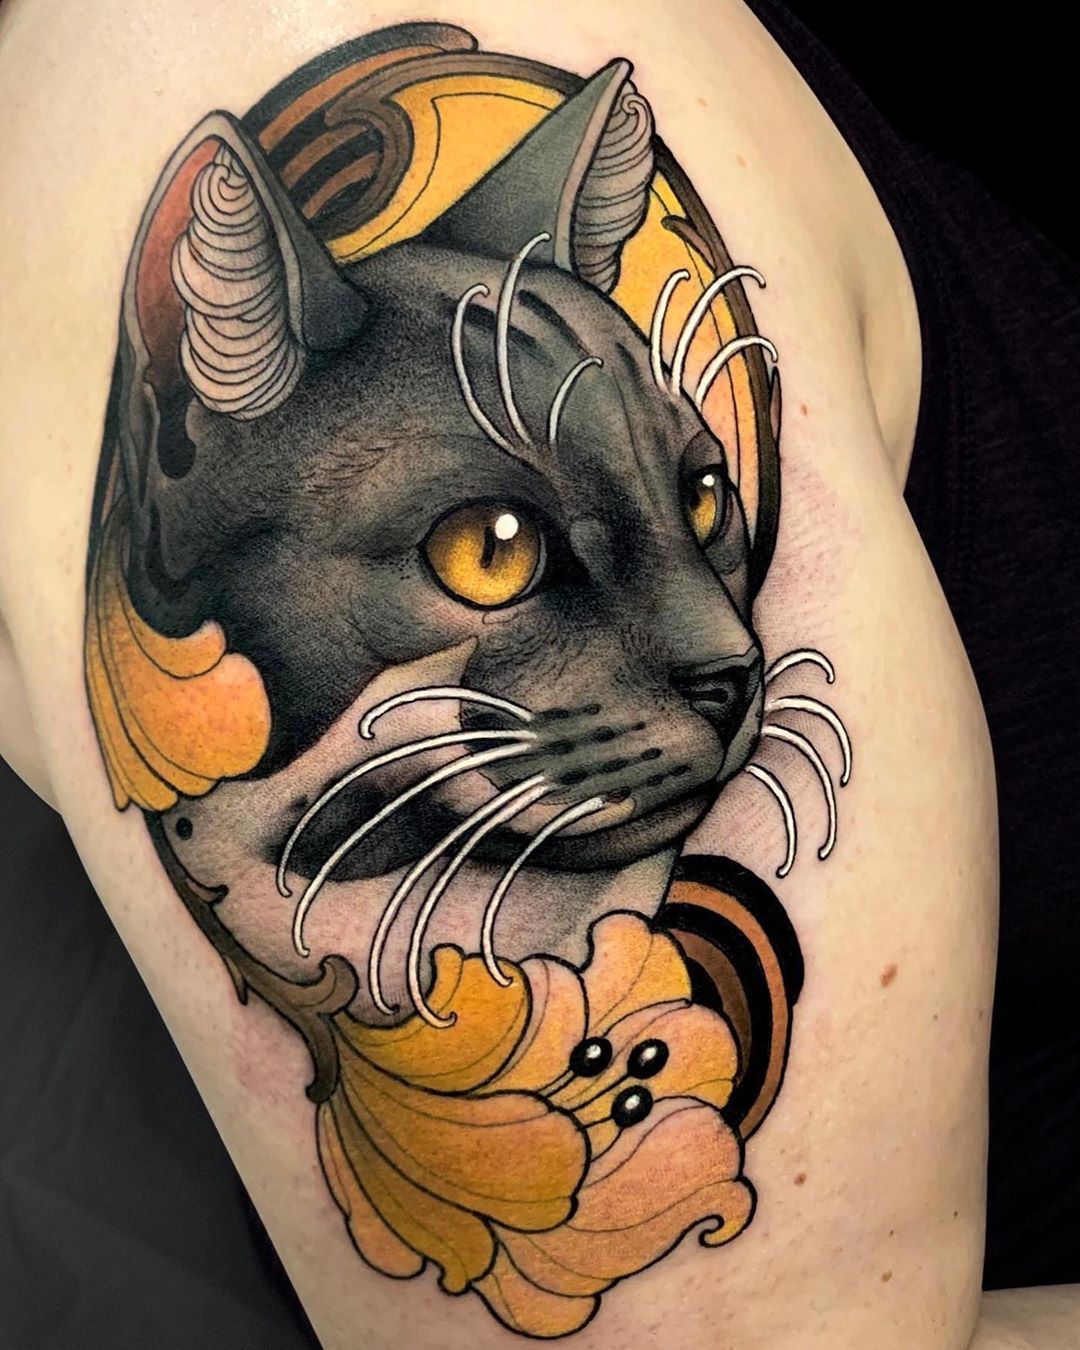 NeoTraditional Japanese Flash Tattoo Series on Behance